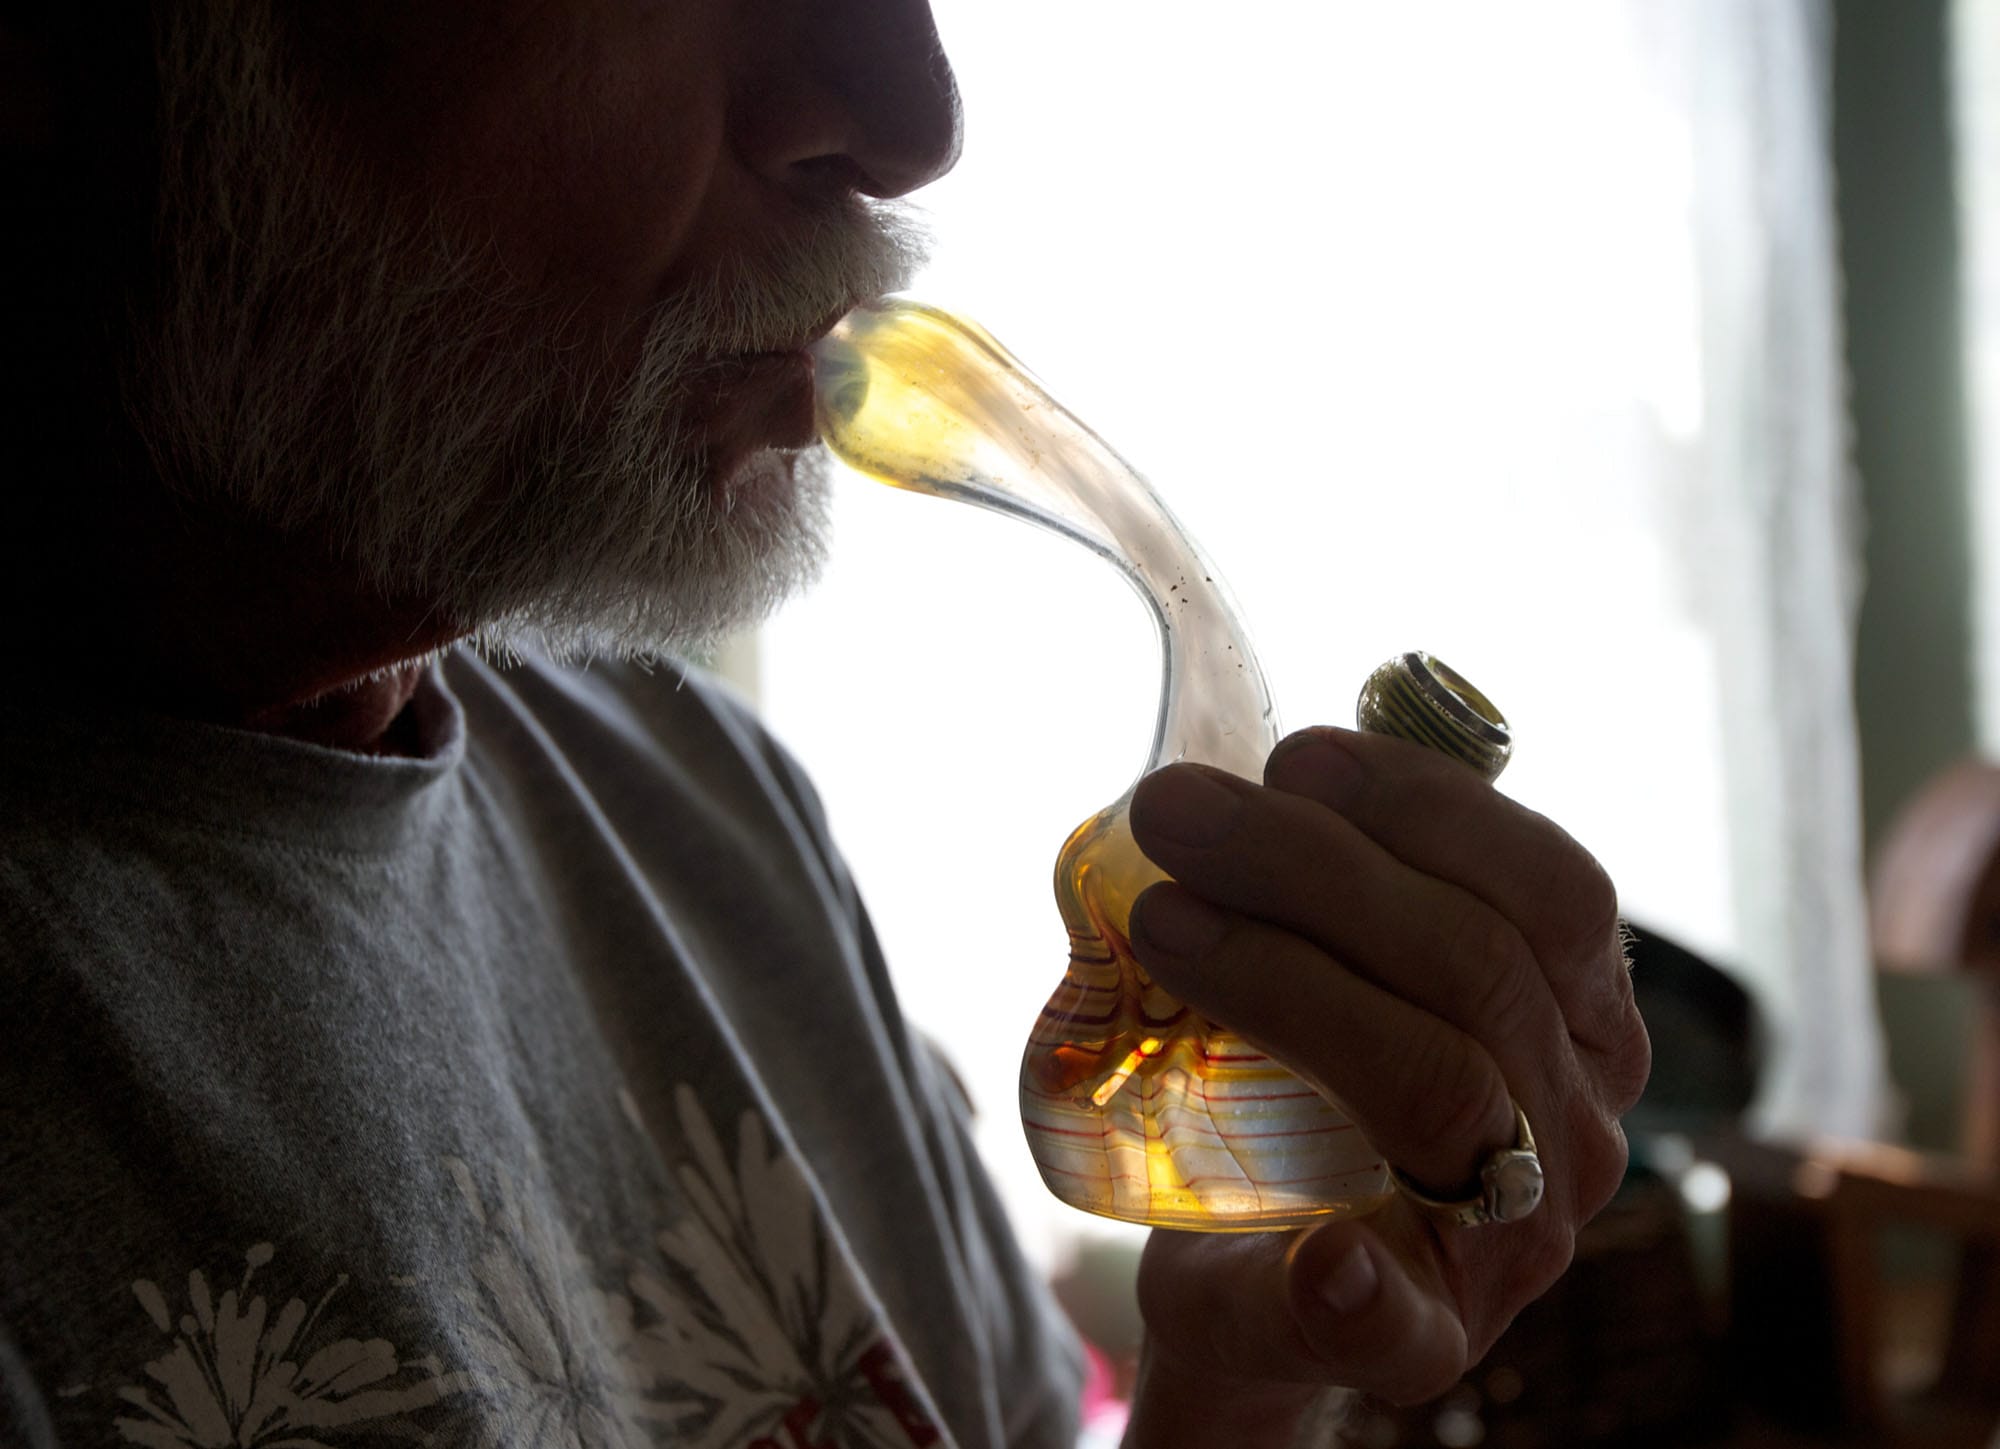 John, a 64-year-old chronic pain sufferer from Camas, smokes marijuana from a water pipe in his home Thursday.